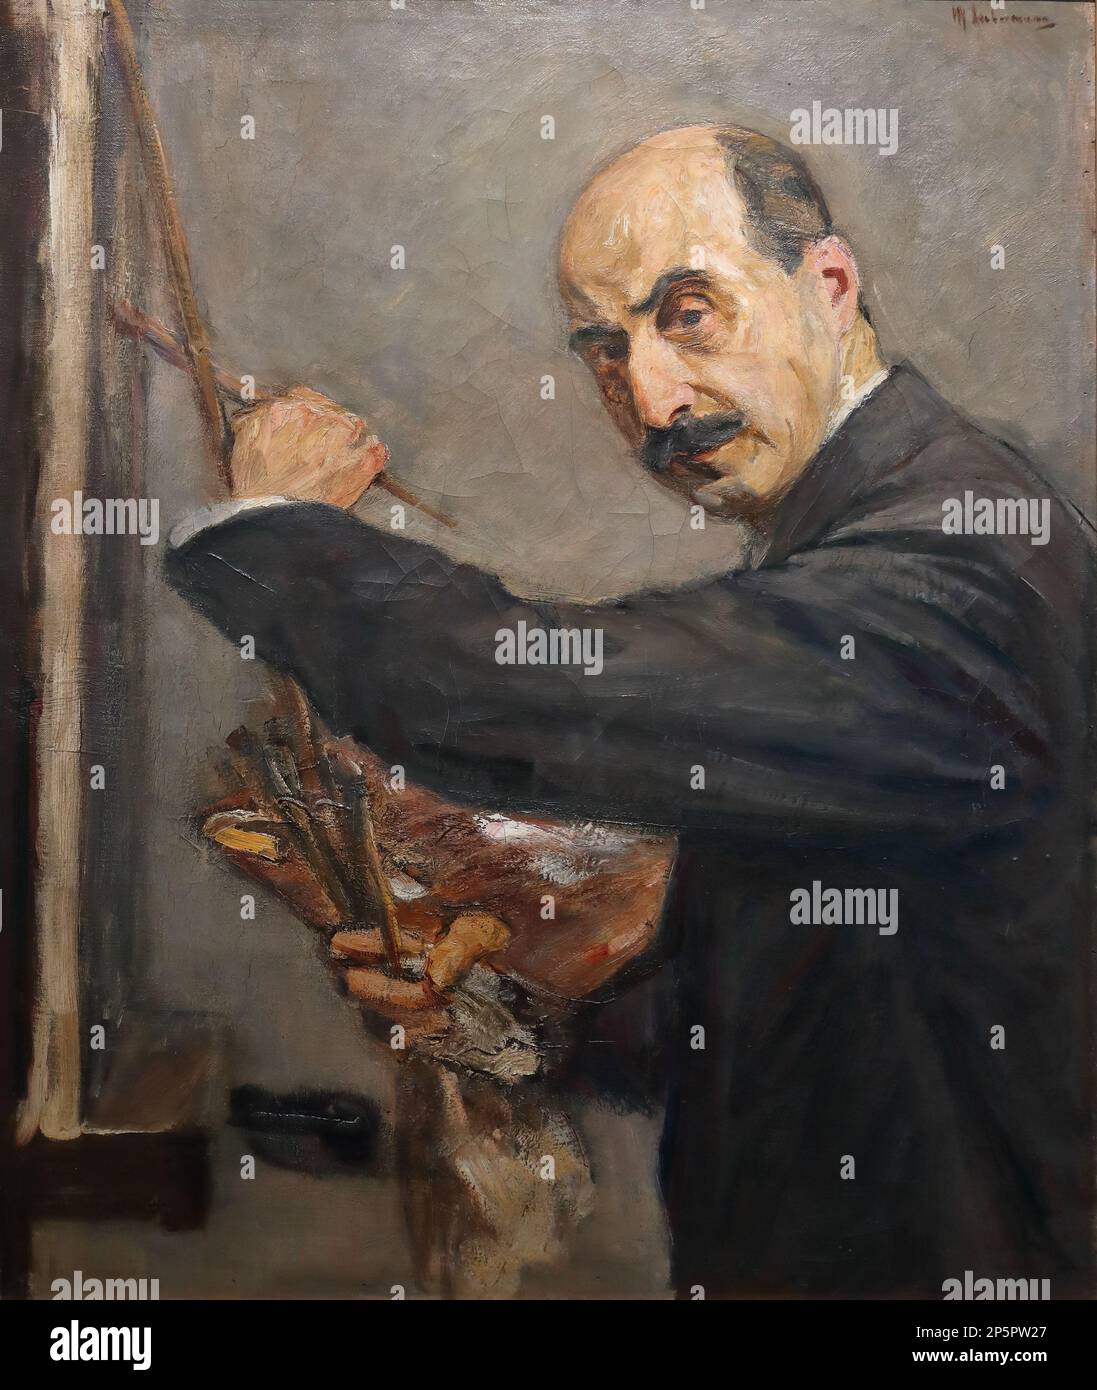 Self-portrait by German Impressionist painter Max Liebermann at the Wallraf-Richartz Museum, Cologne, Germany Stock Photo